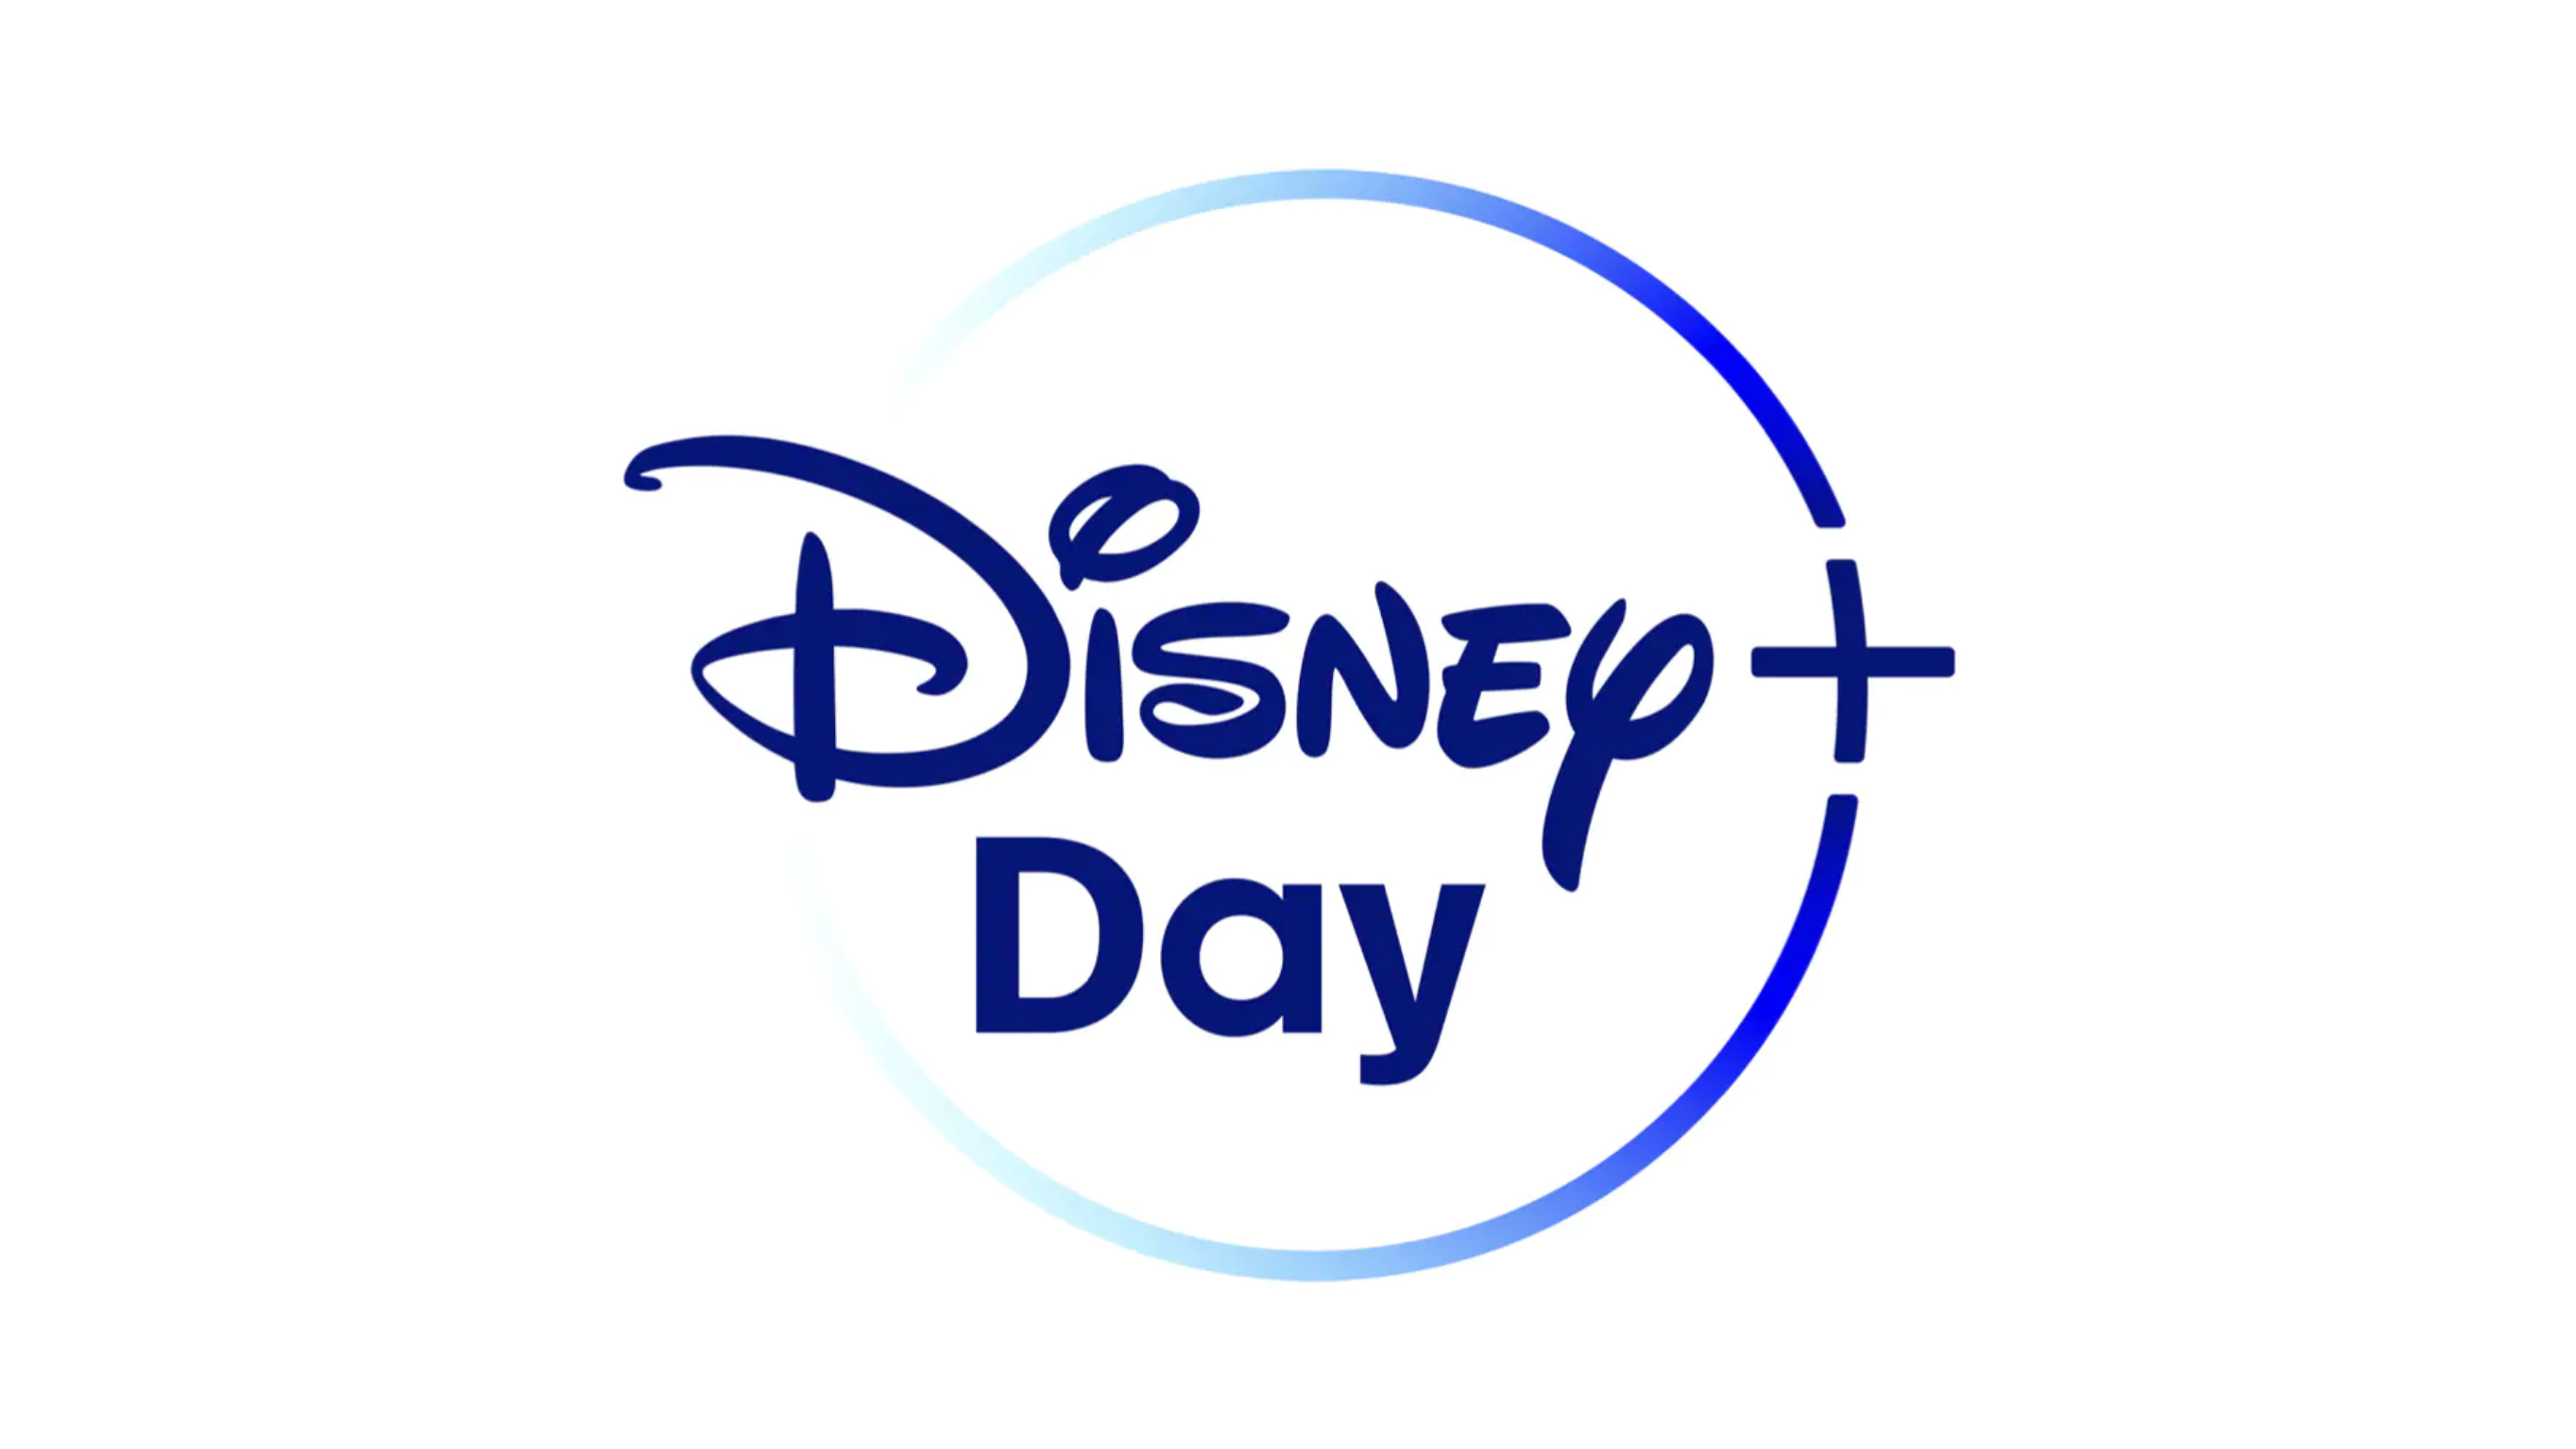 Disney Plus Day live! ShangChi, new Star Wars, Marvel films and more